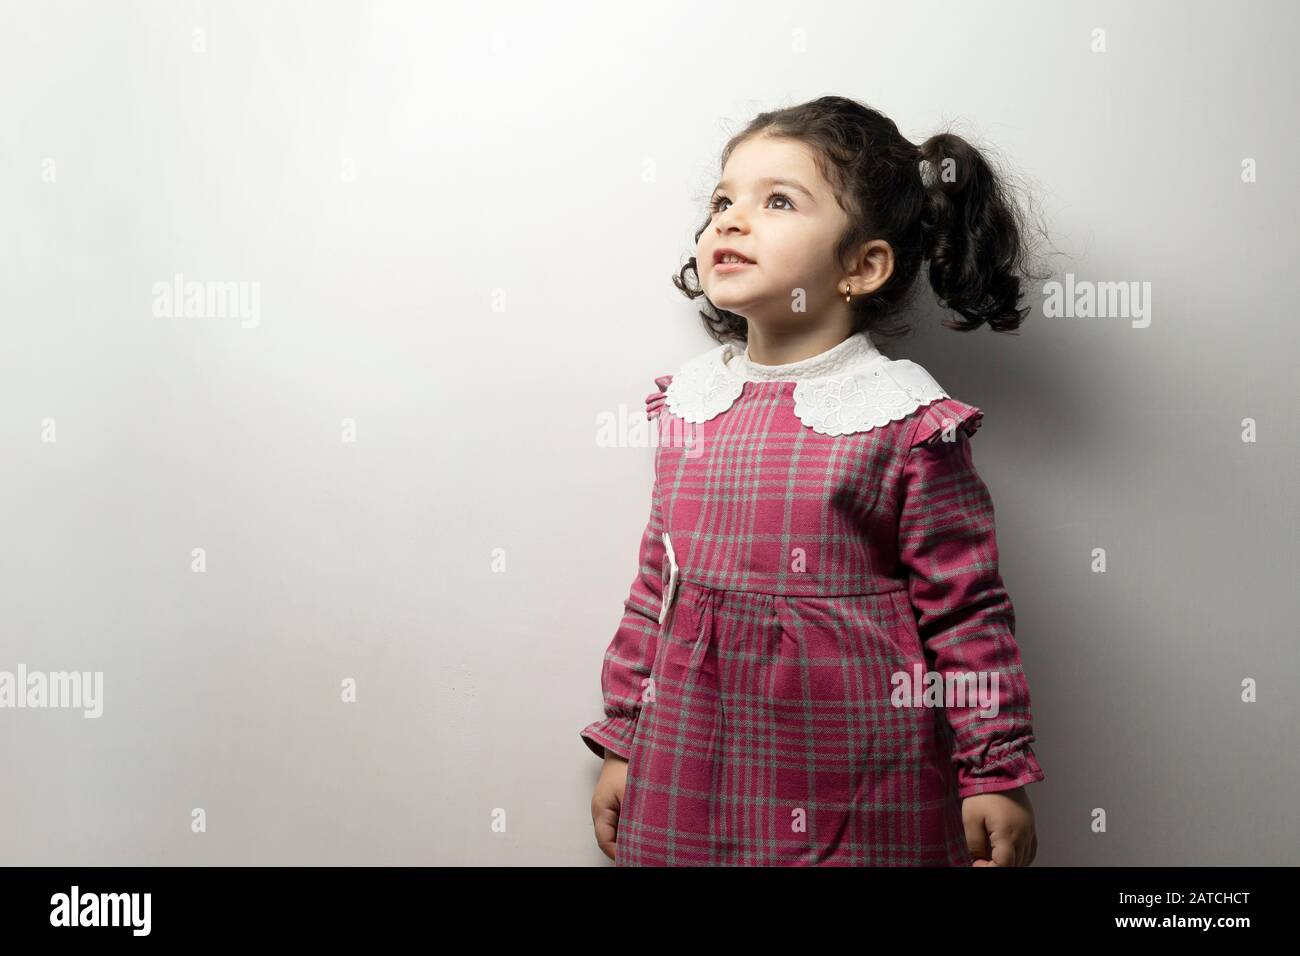 Little girl with side pony hairstyle looking outside of frame, childhood  memories concept Stock Photo - Alamy